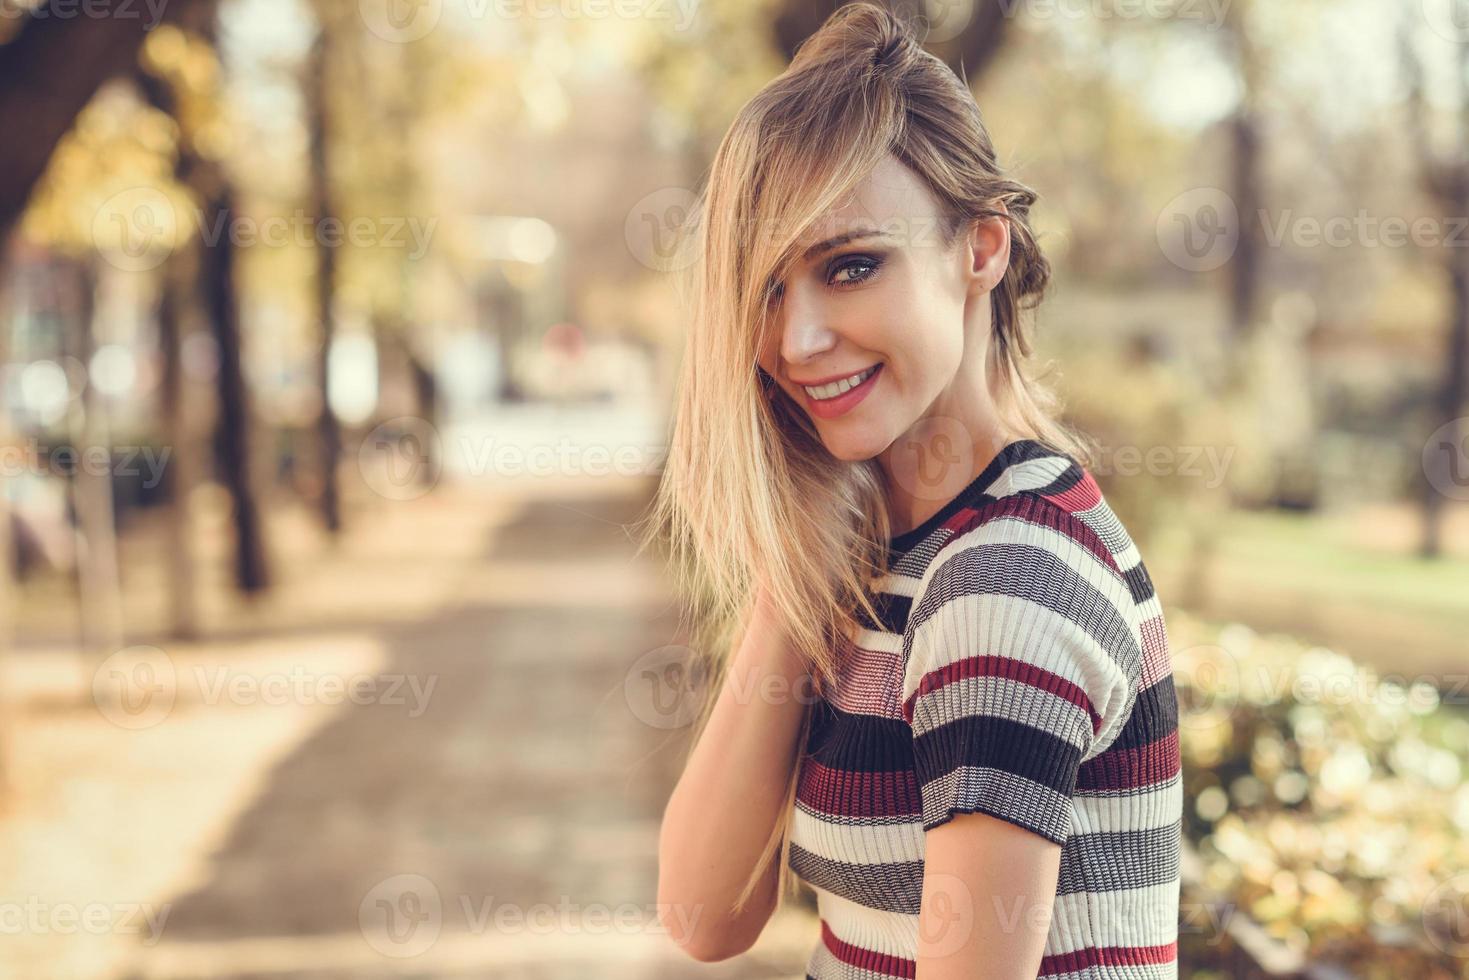 Young blonde woman standing in the street moving her hair photo